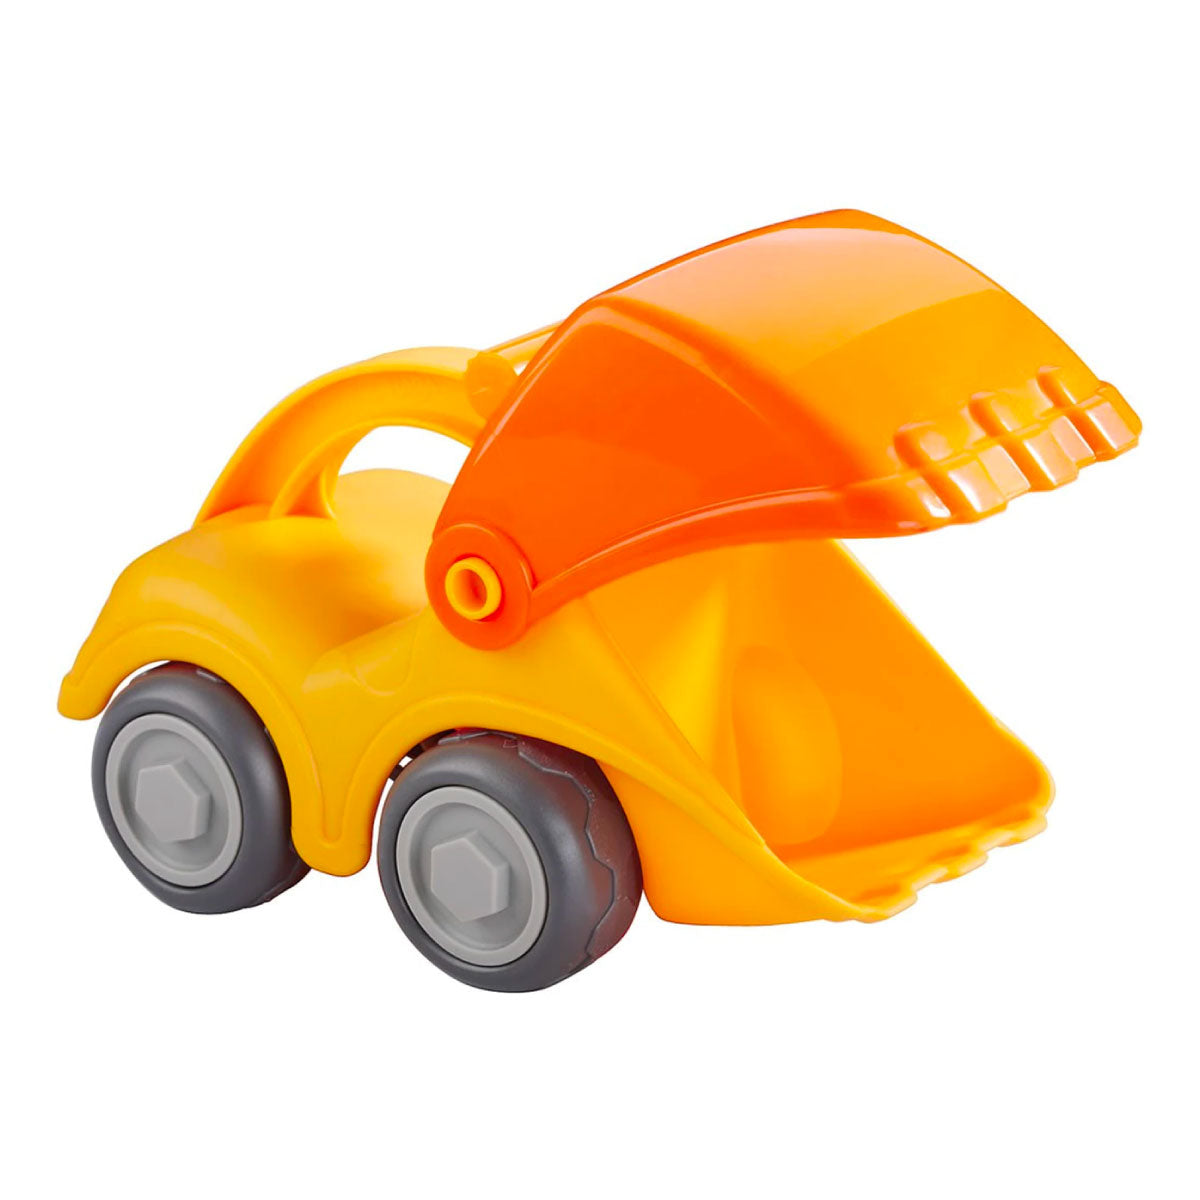 Sand Play Excavator from Haba